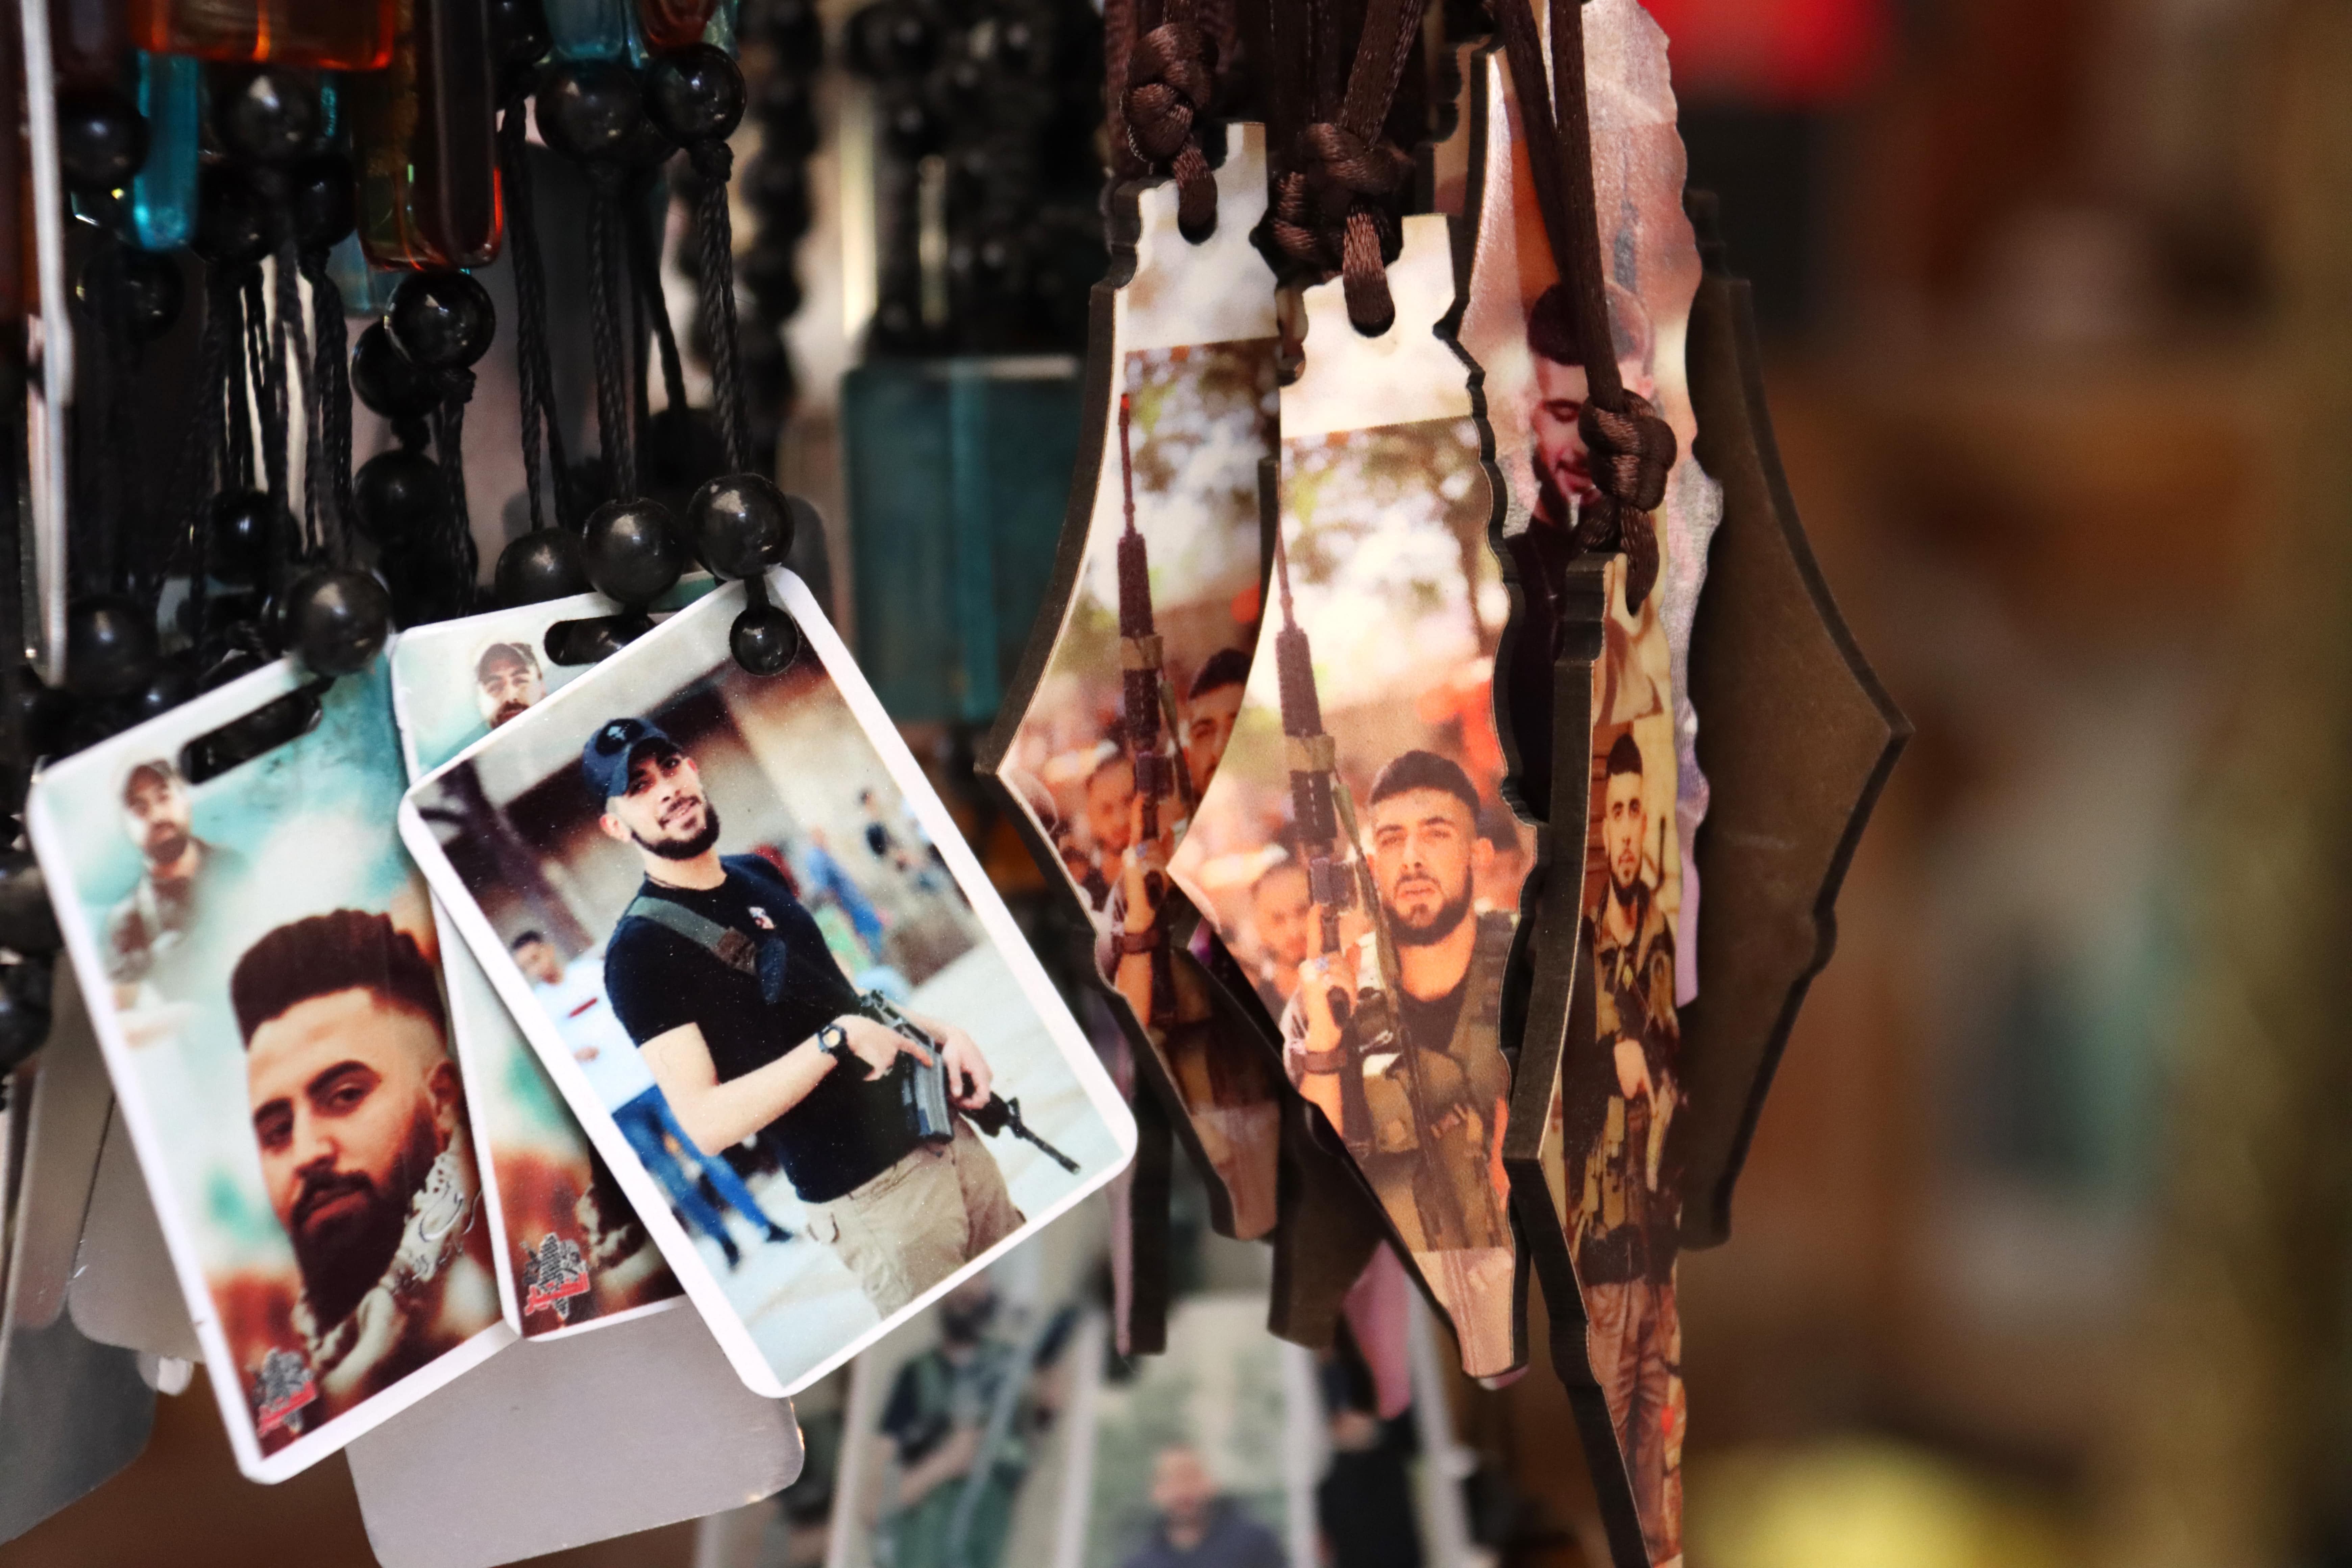 Necklaces depicting photos of Nablus’ local fighters are shown at a souvenir shop in the old town of Nablus in the occupied West Bank on 24 October 2022 (MEE/Ahmad Al-Bazz)